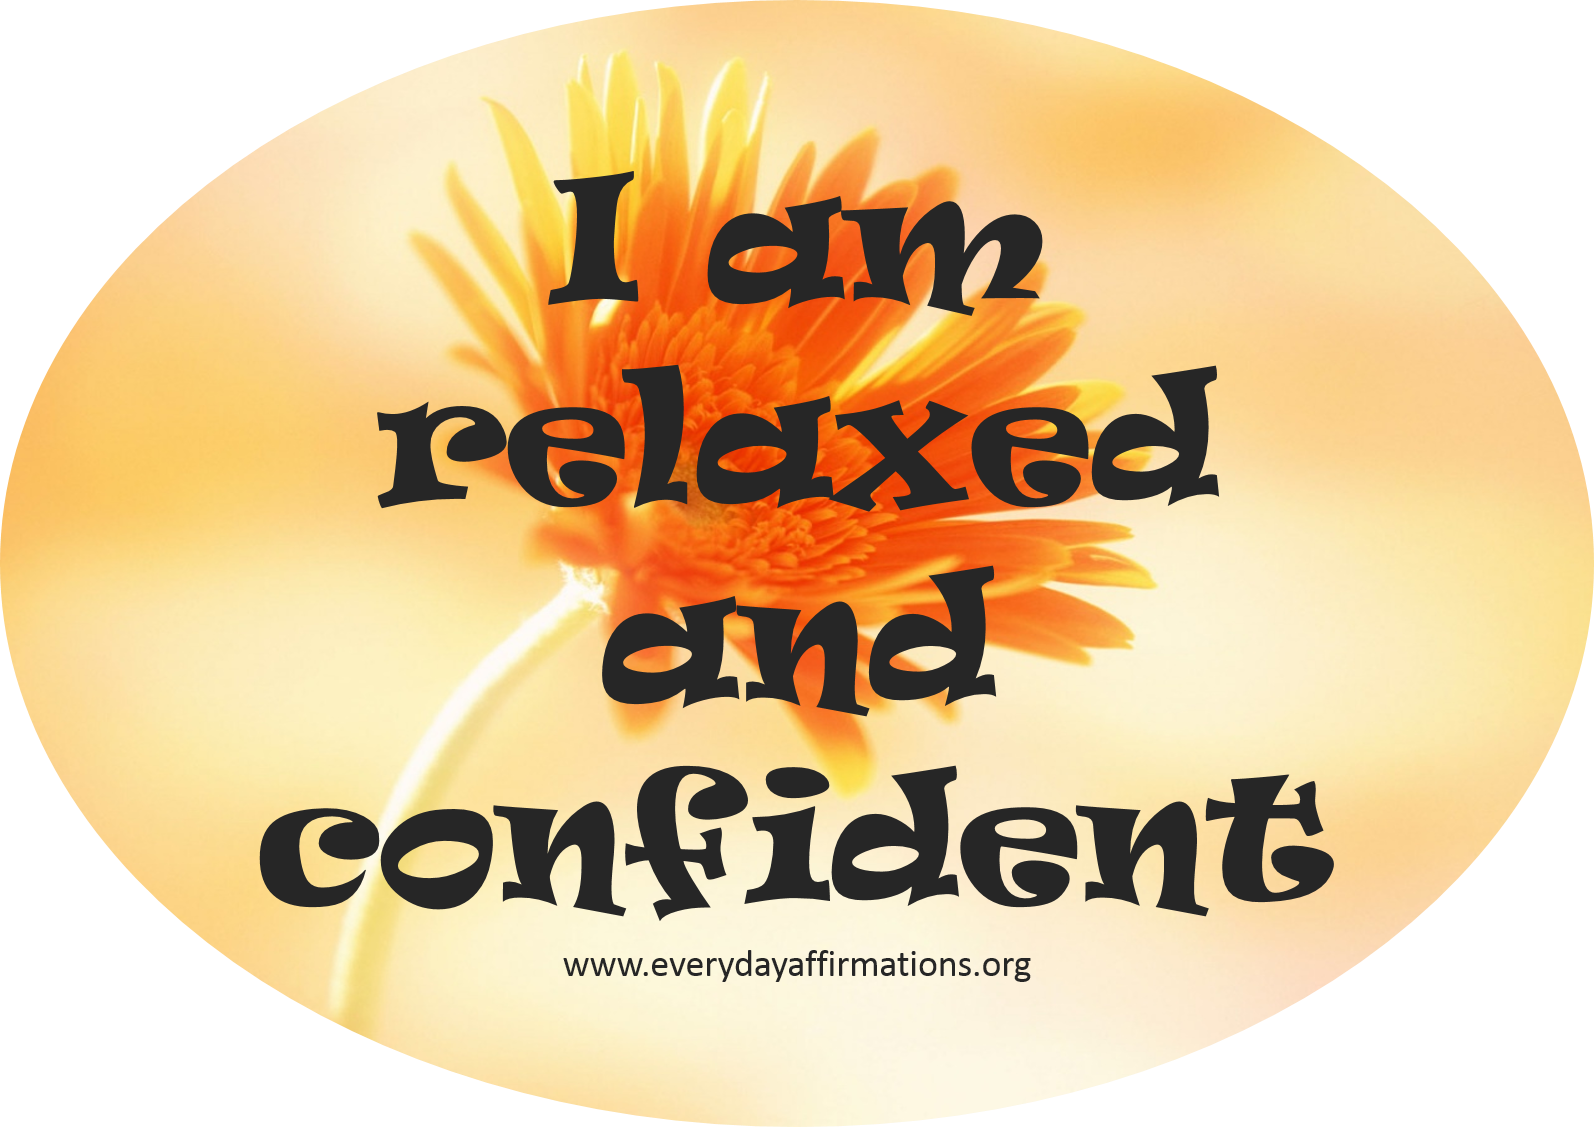 Daily Affirmations 31 October 2015  Everyday Affirmations